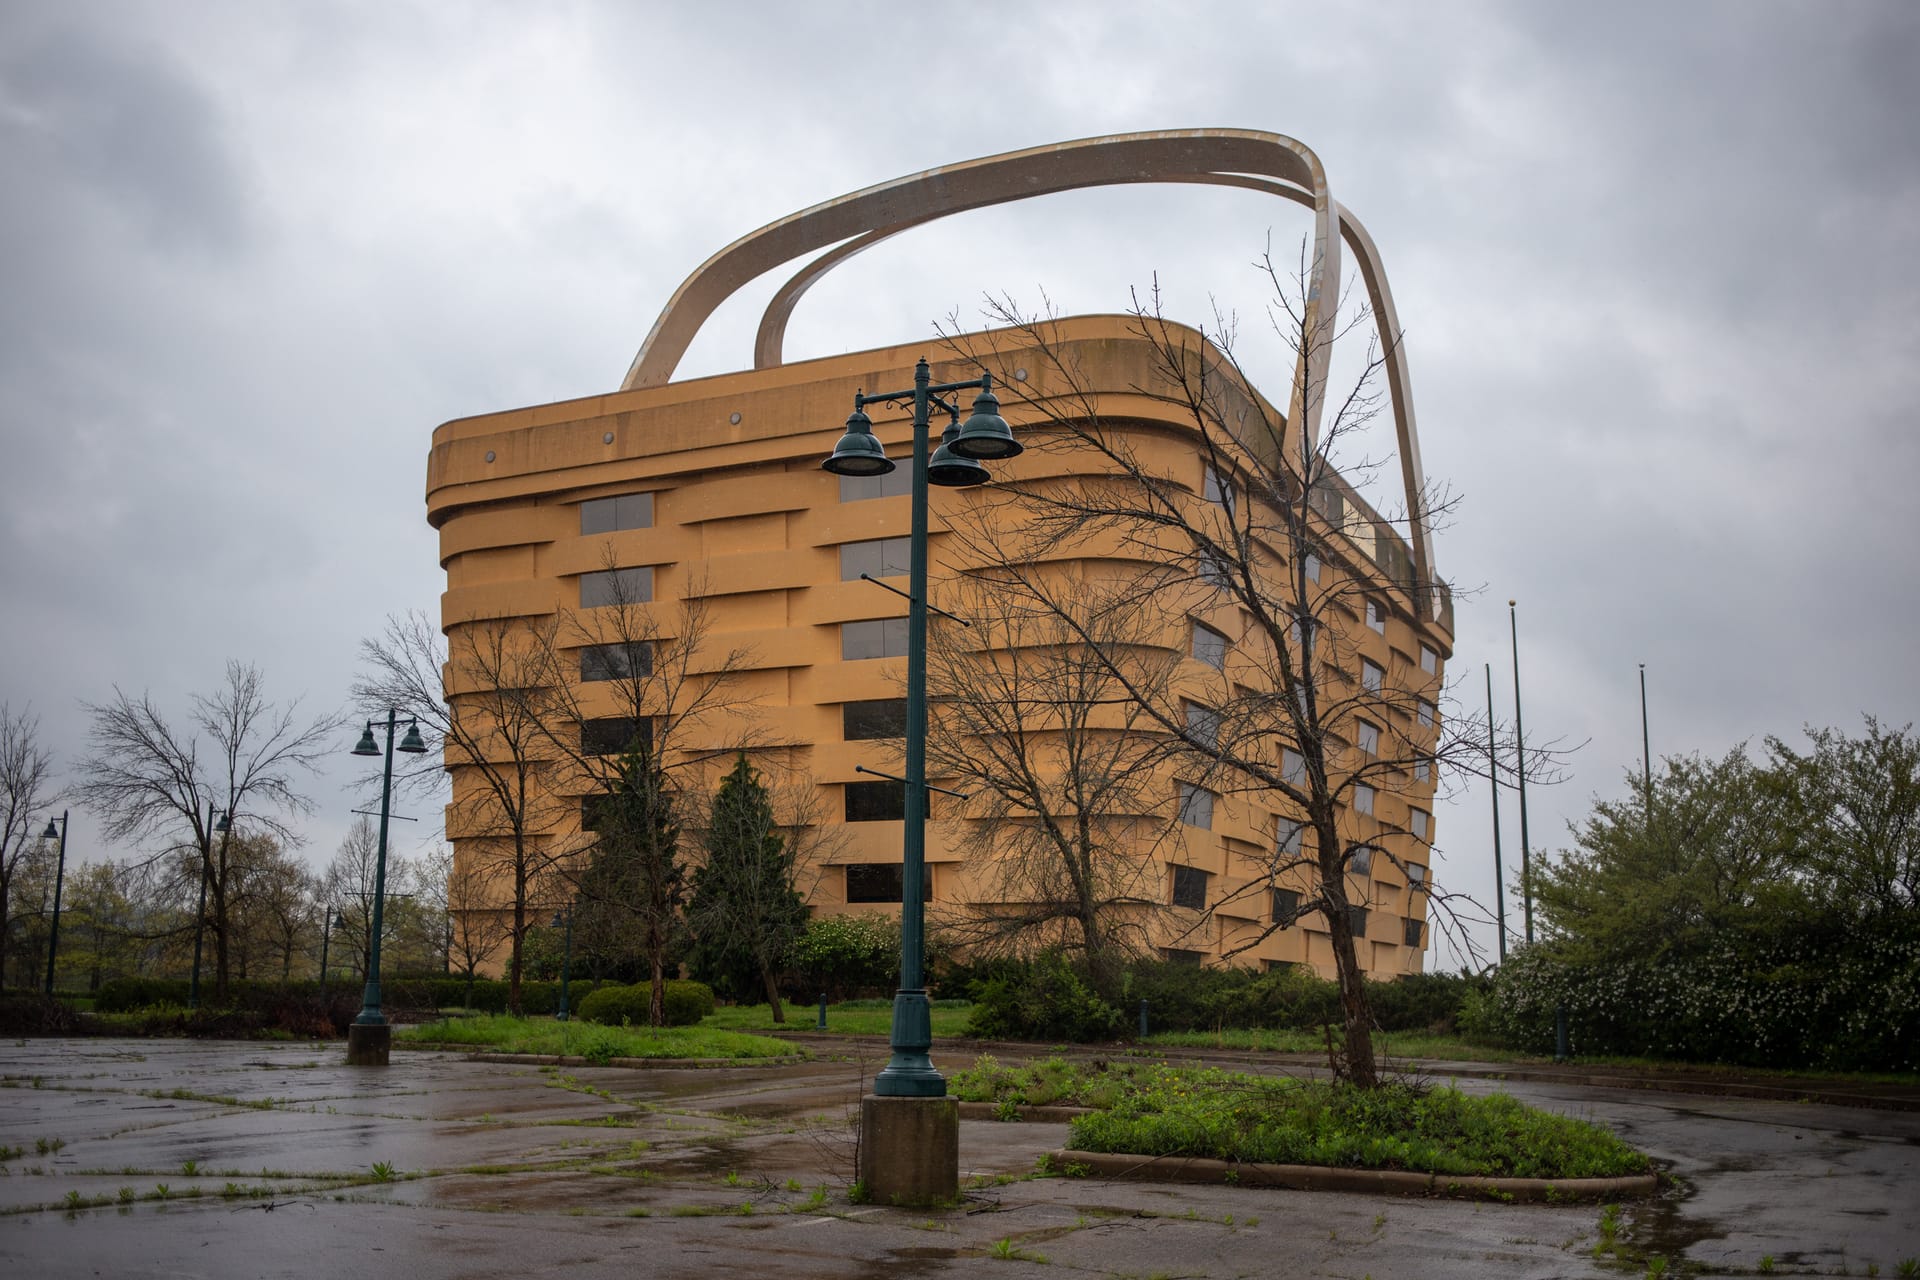 Ohio’s Longaberger basket-shaped building faces an uncertain future after the company’s bankruptcy